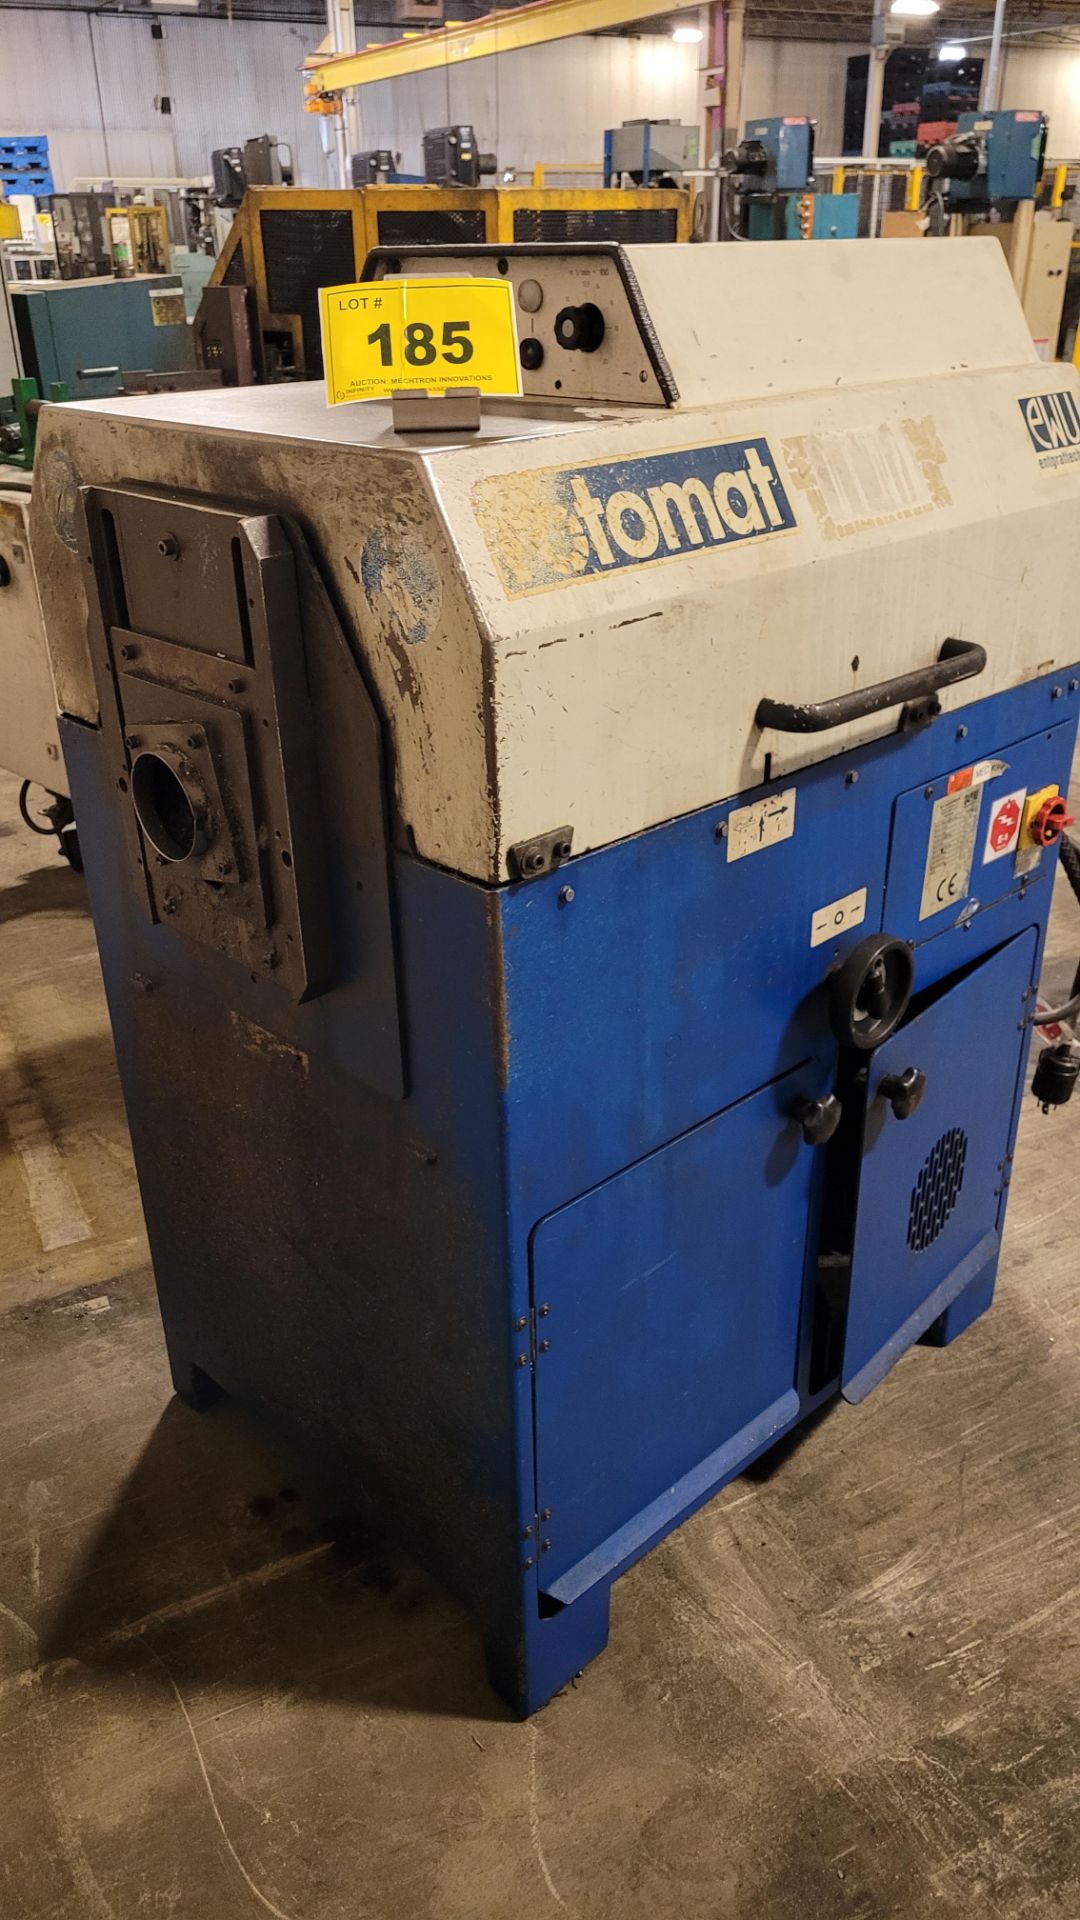 2006 ROTOMAT DEBURRING MACHINE, NO. 0541-4660, S/N 1537, 500 - 2,000 RPM SPINDLE SPEED, 180MM